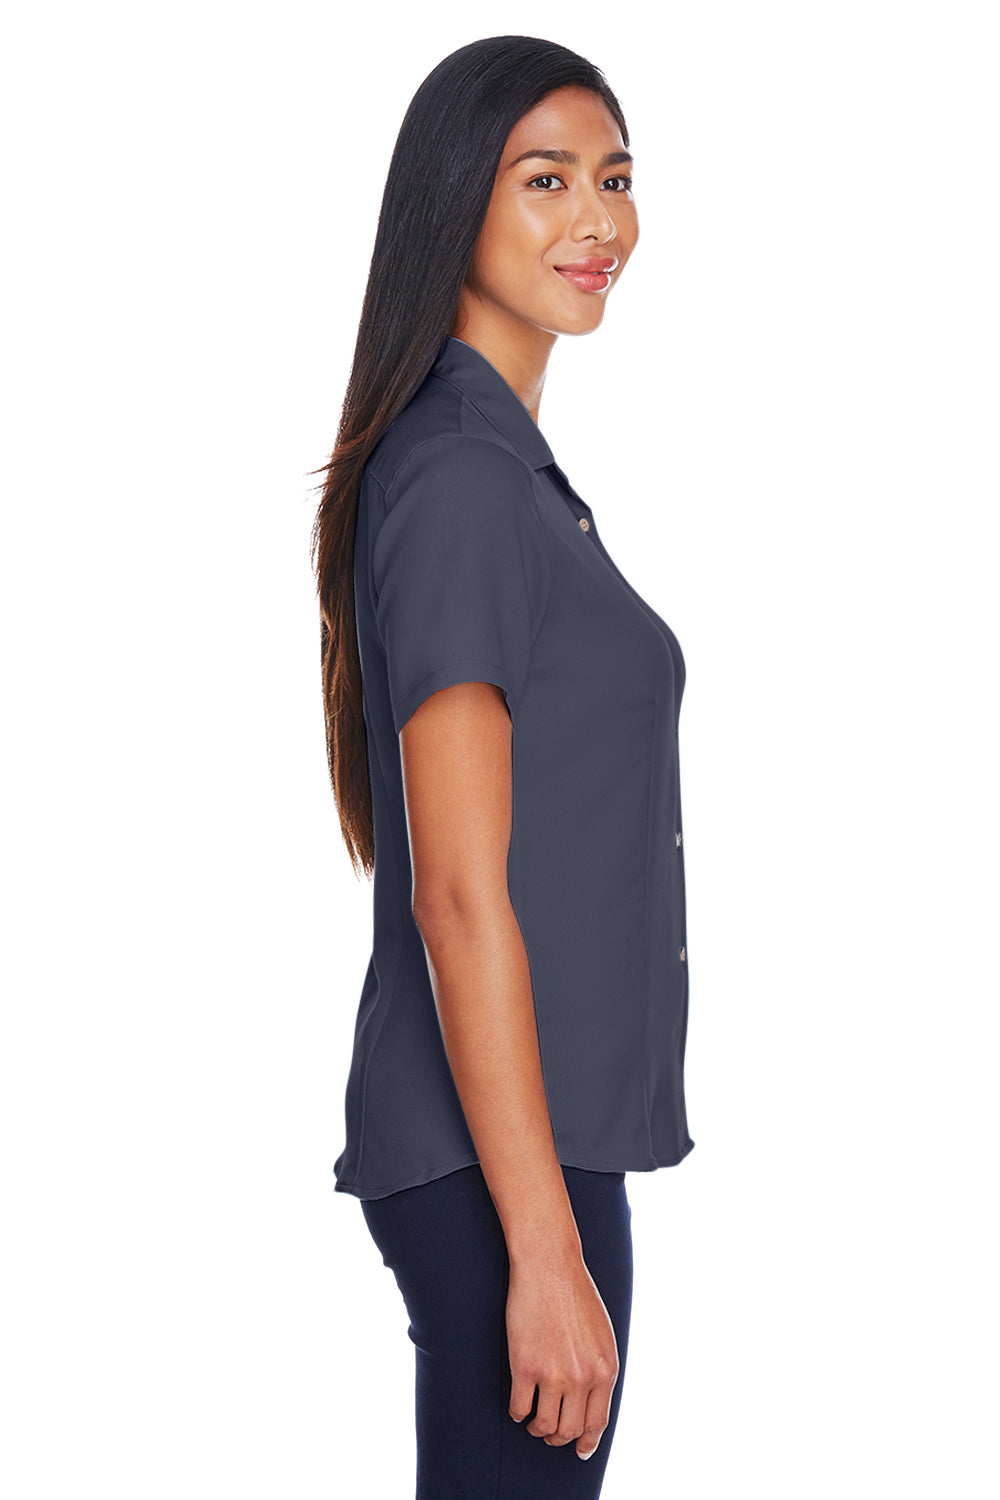 Harriton M570W Womens Bahama Wrinkle Resistant Short Sleeve Button Down Camp Shirt Navy Blue Side